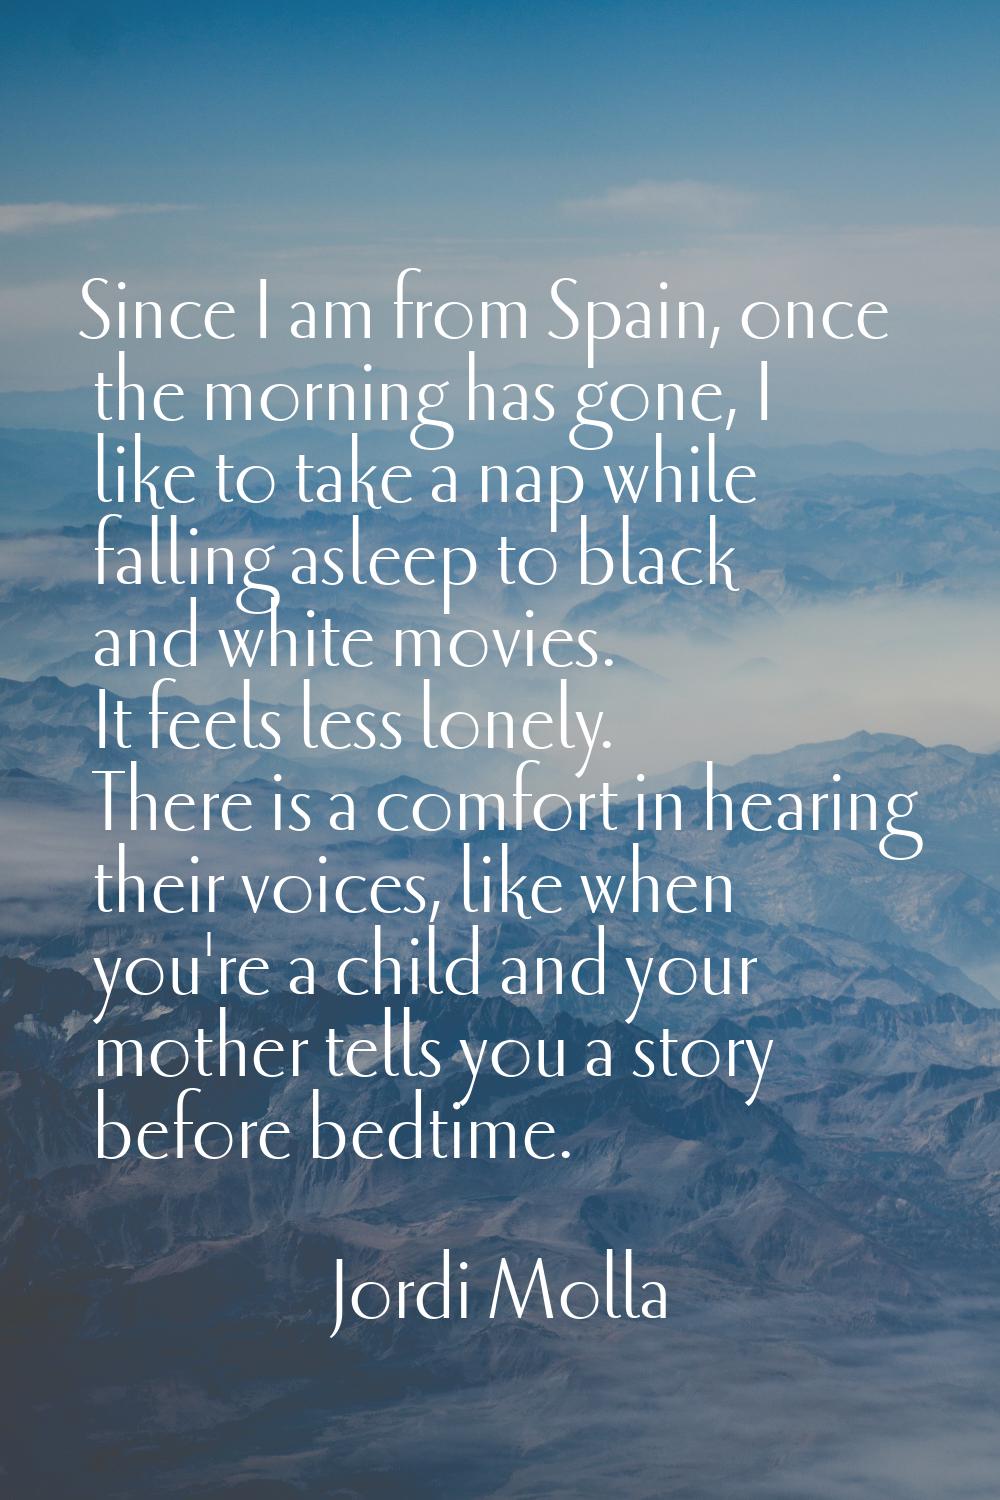 Since I am from Spain, once the morning has gone, I like to take a nap while falling asleep to blac